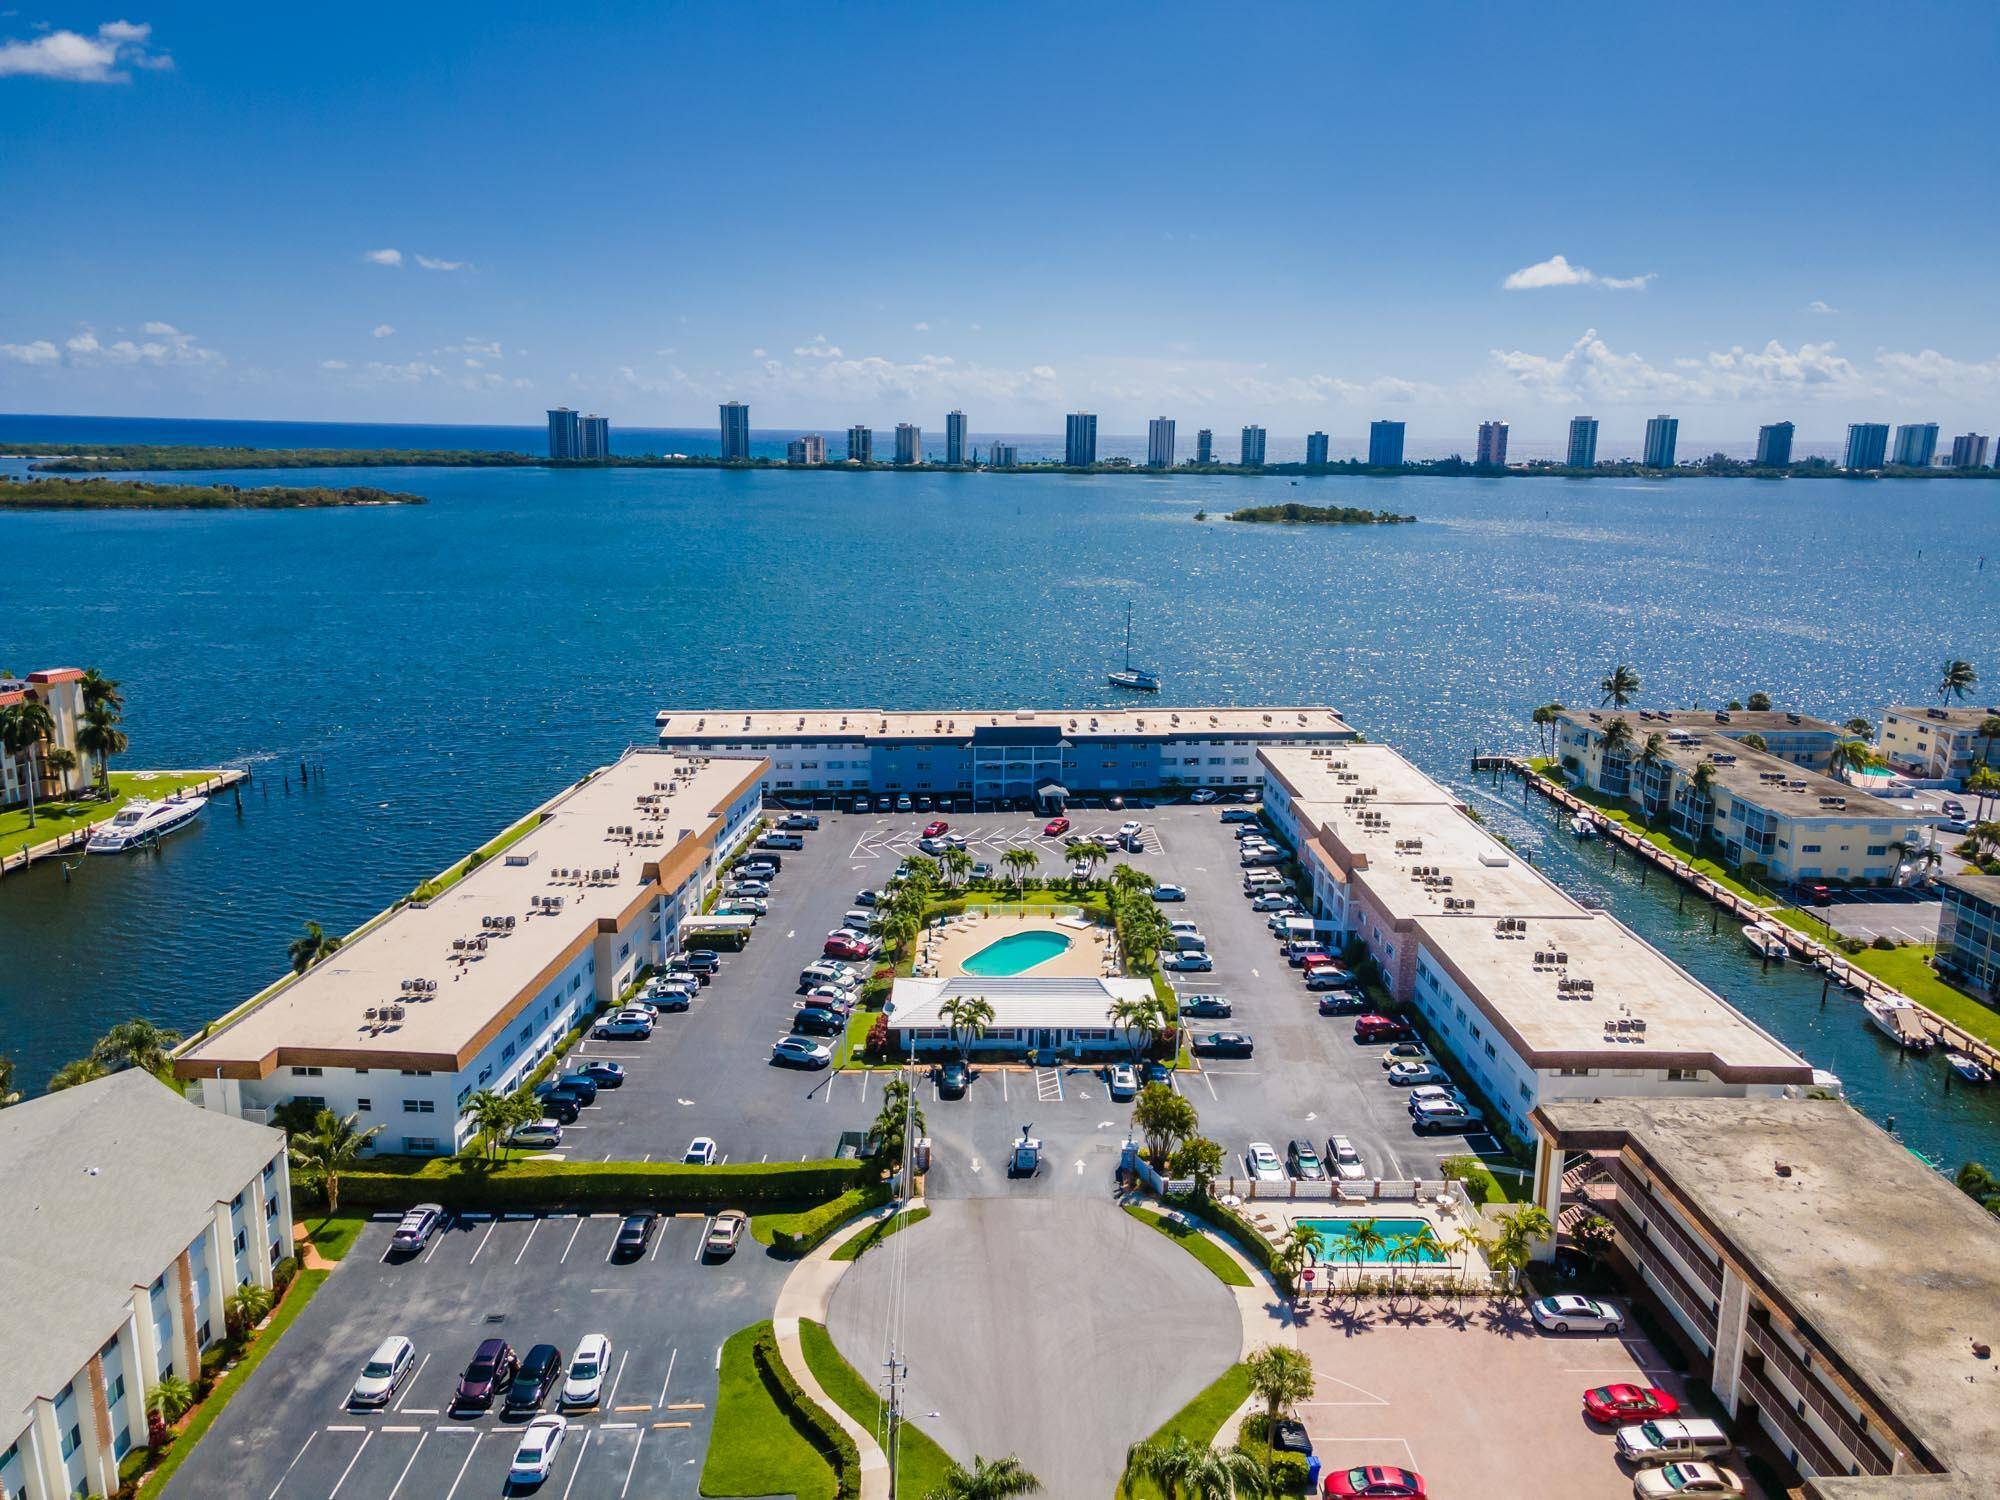 Indulge in the breathtaking waterviews from this captivating 2 bedroom, 2 bath condo nestled in the vibrant 55 community of Shore Club.